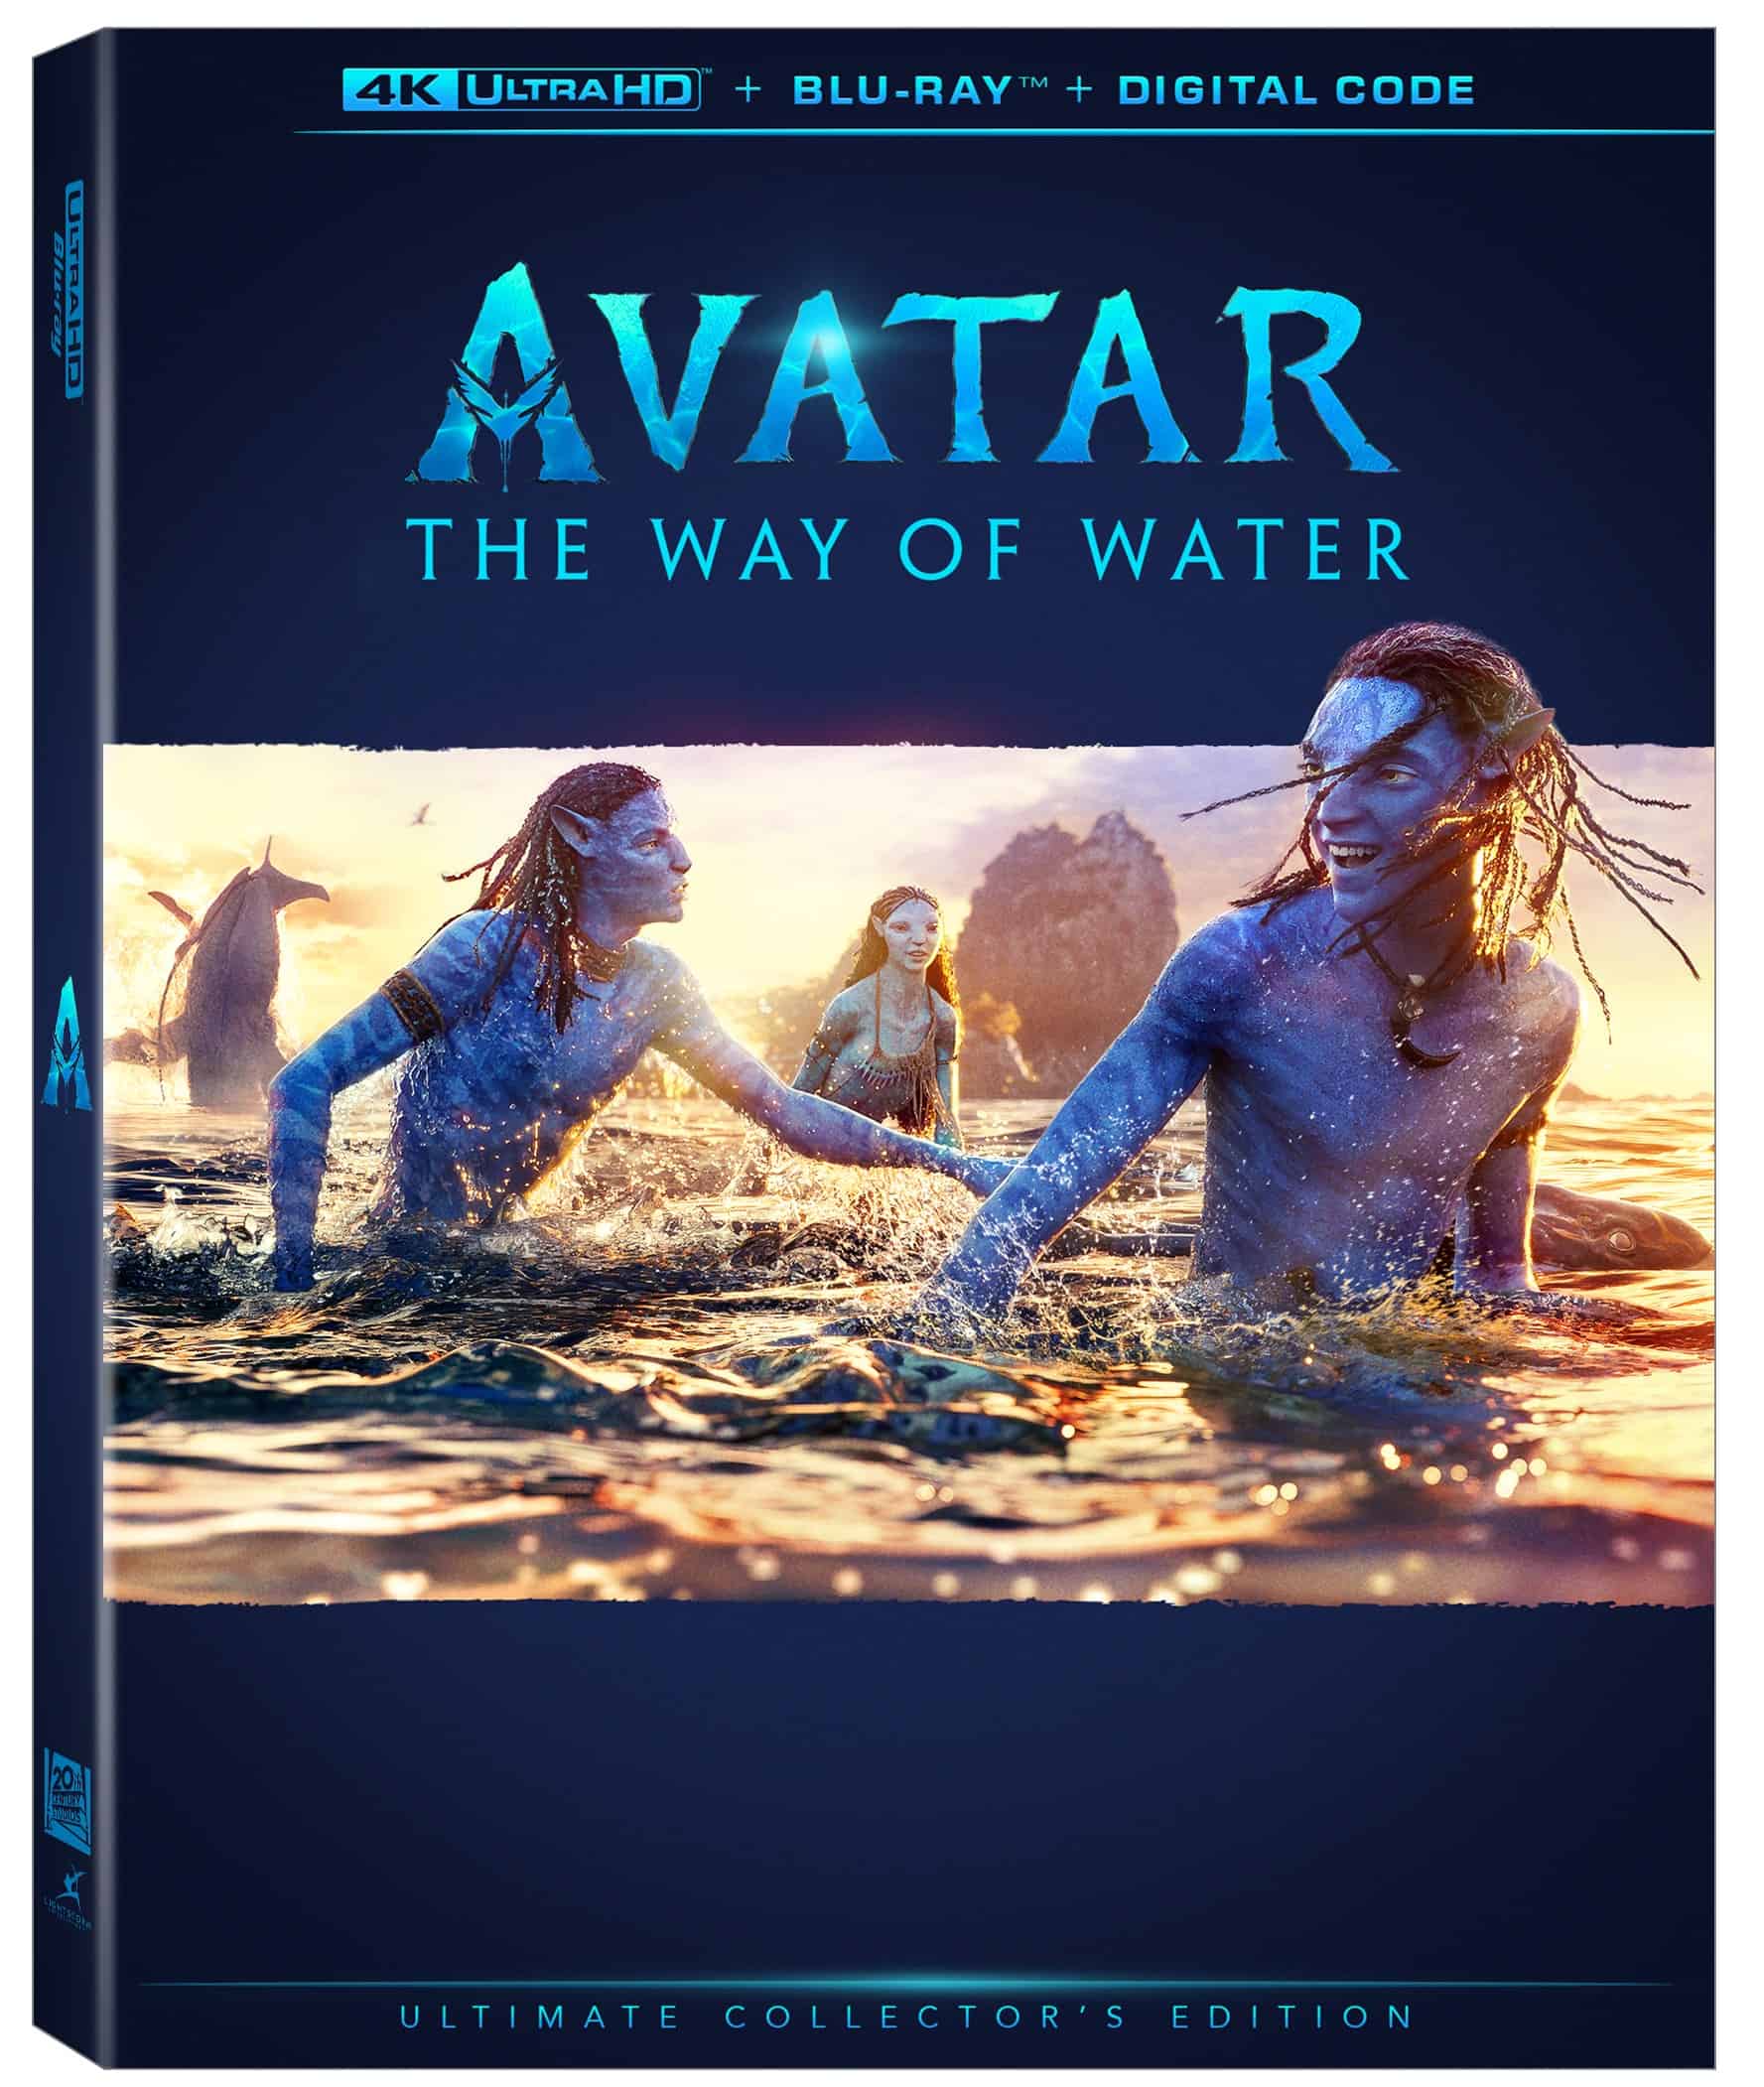 Double Celebration for Avatar Fans: The Arrival of Avatar: The Way of Water and the Ultimate Avatar Experience in 4K UHD 23